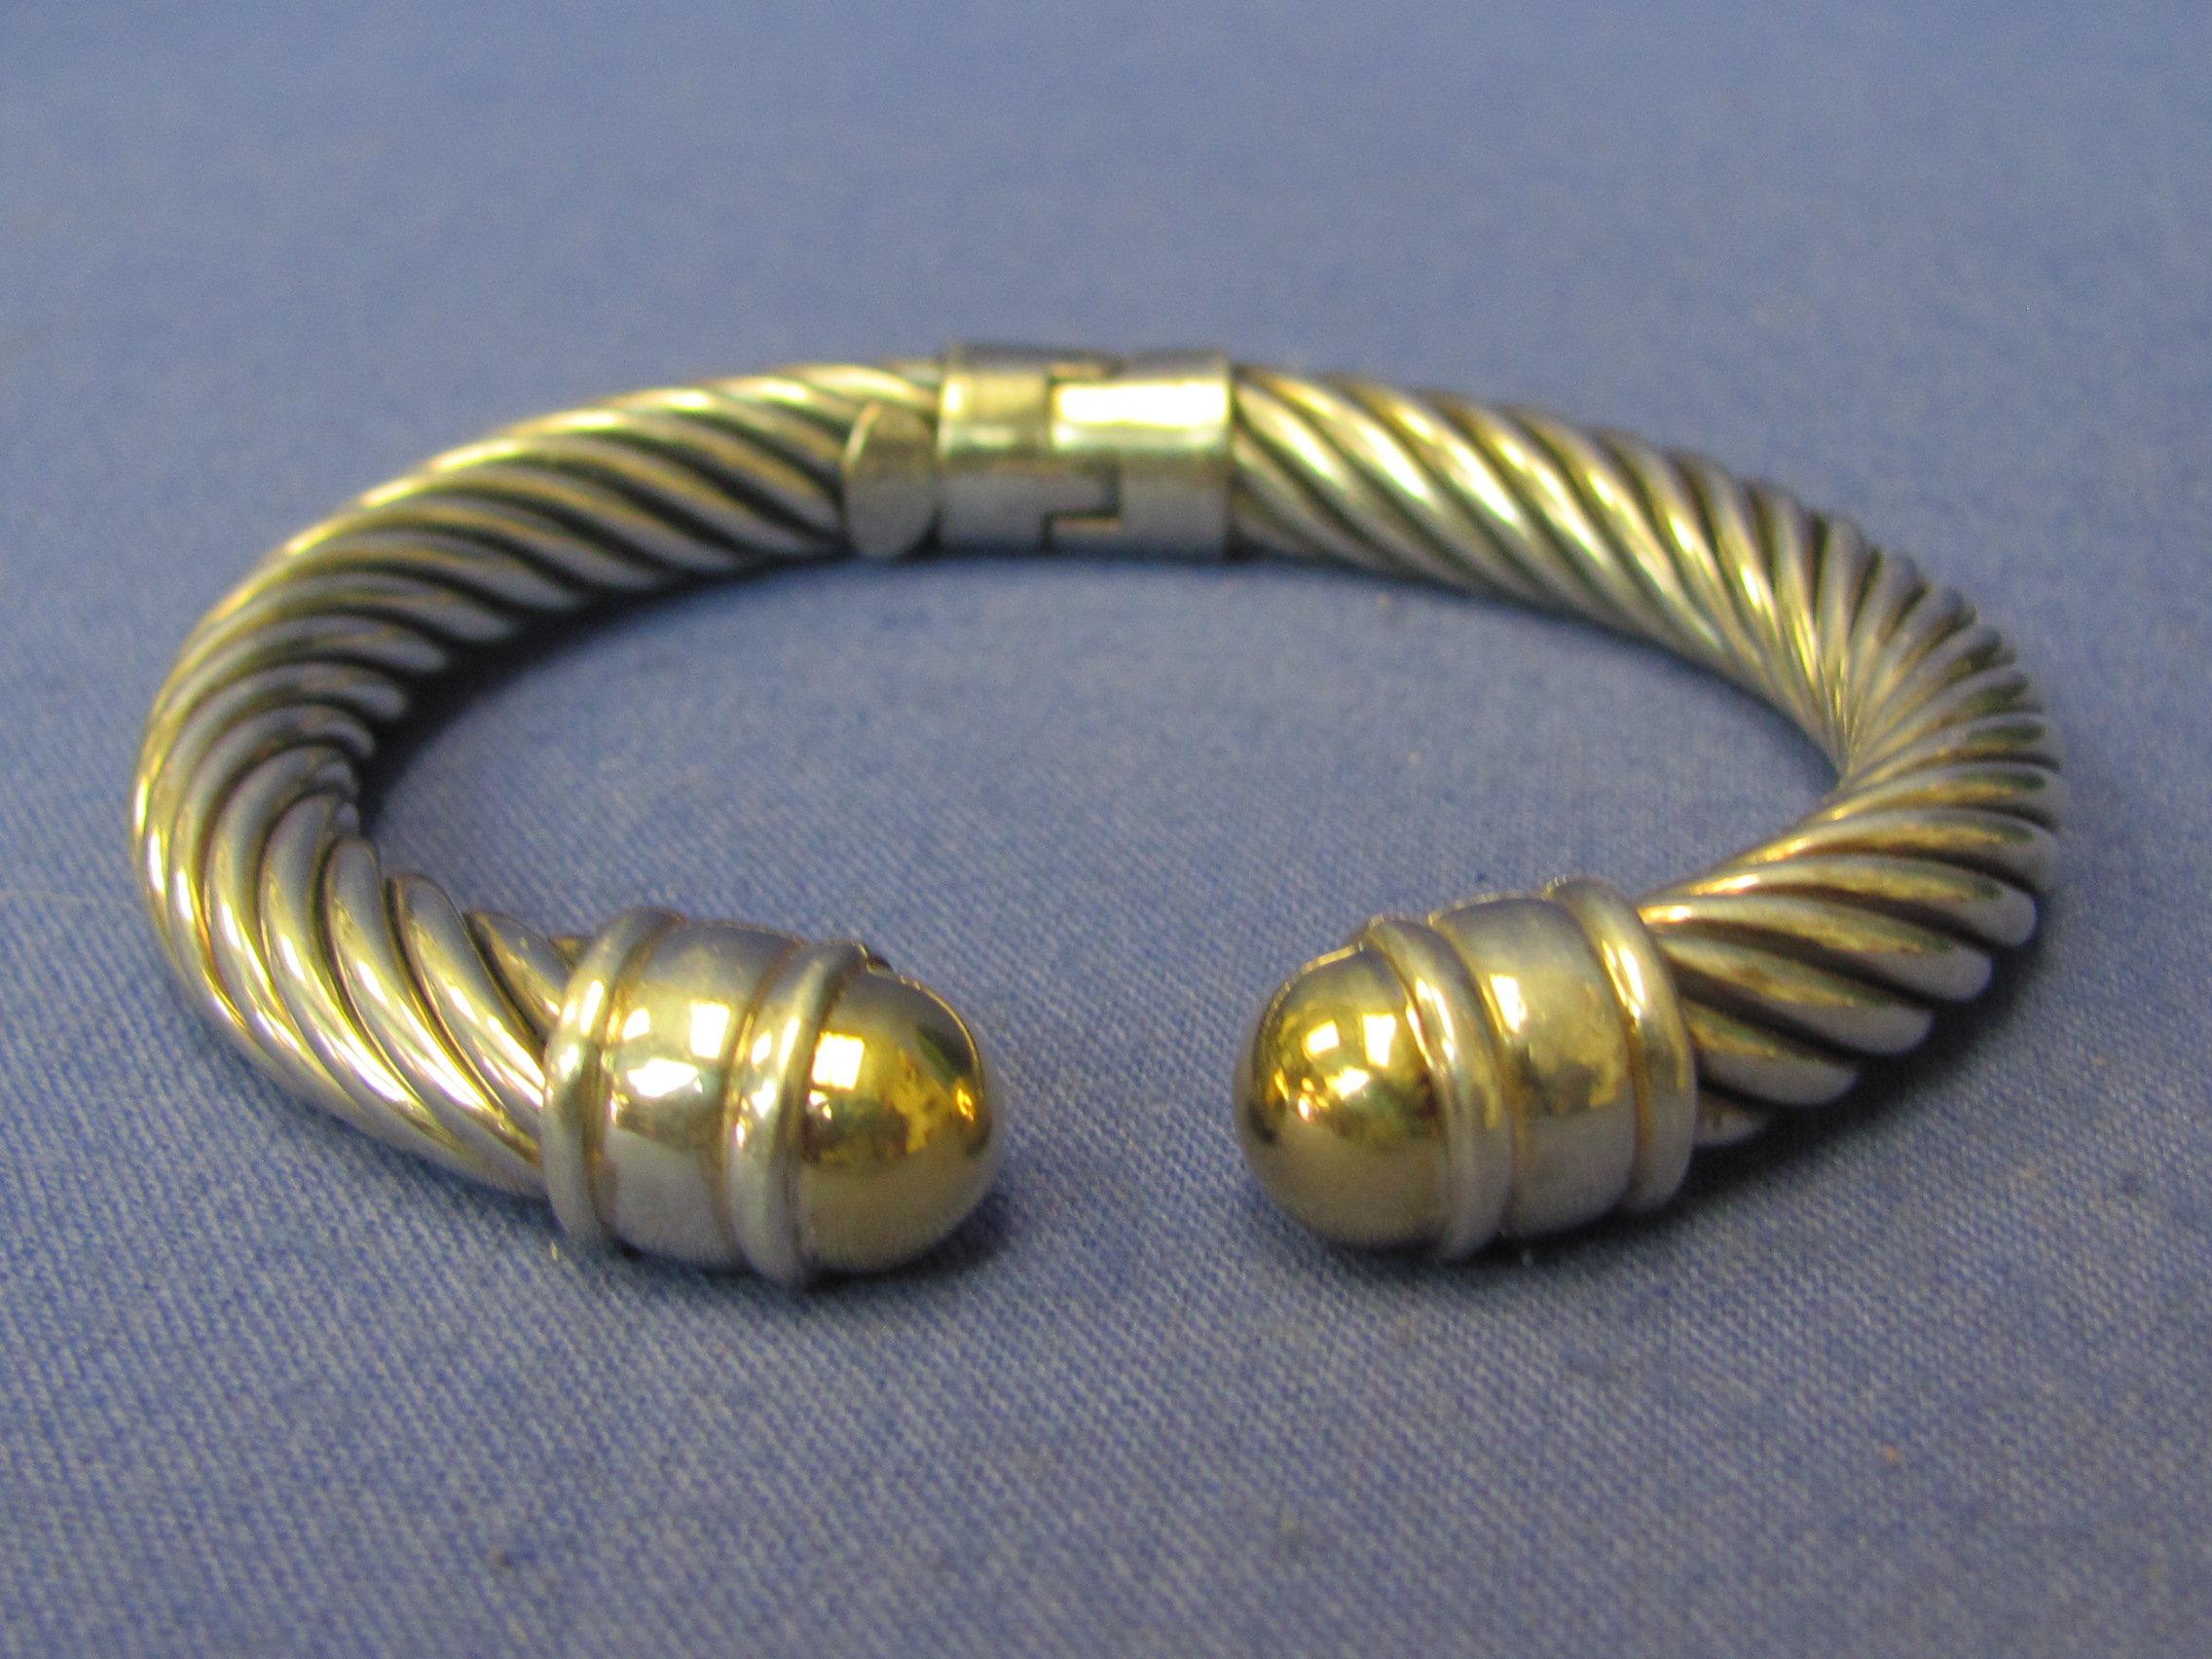 Hinged Bracelet – Sterling Silver w 14 Kt Gold Ends – Made in Italy – Weight is 35.2 grams